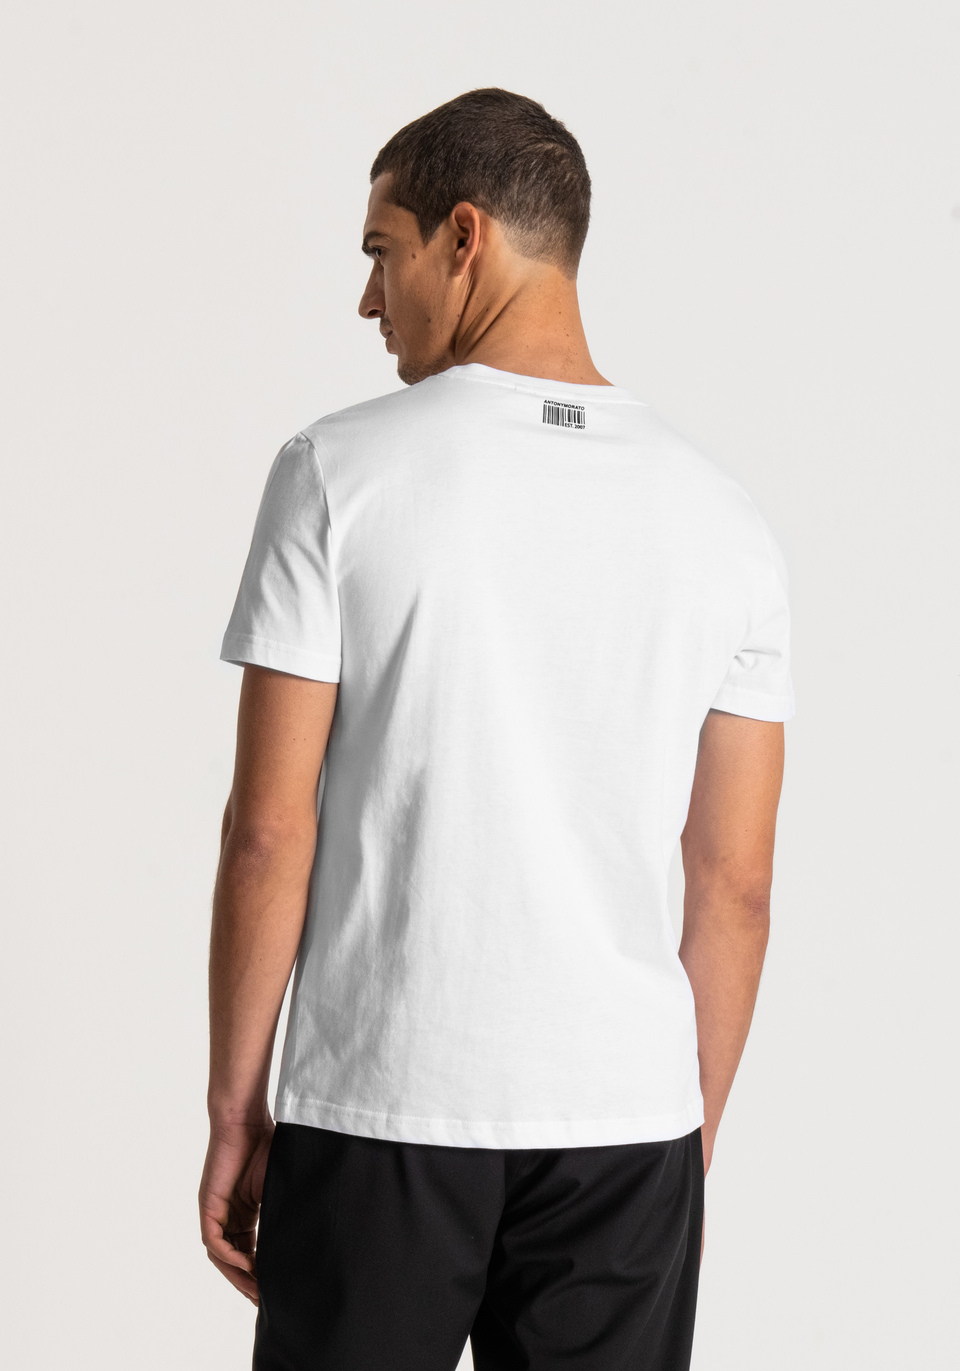 SLIM-FIT T-SHIRT IN 100% COTTON WITH A RUBBER-COATED PRINT - Antony Morato Online Shop